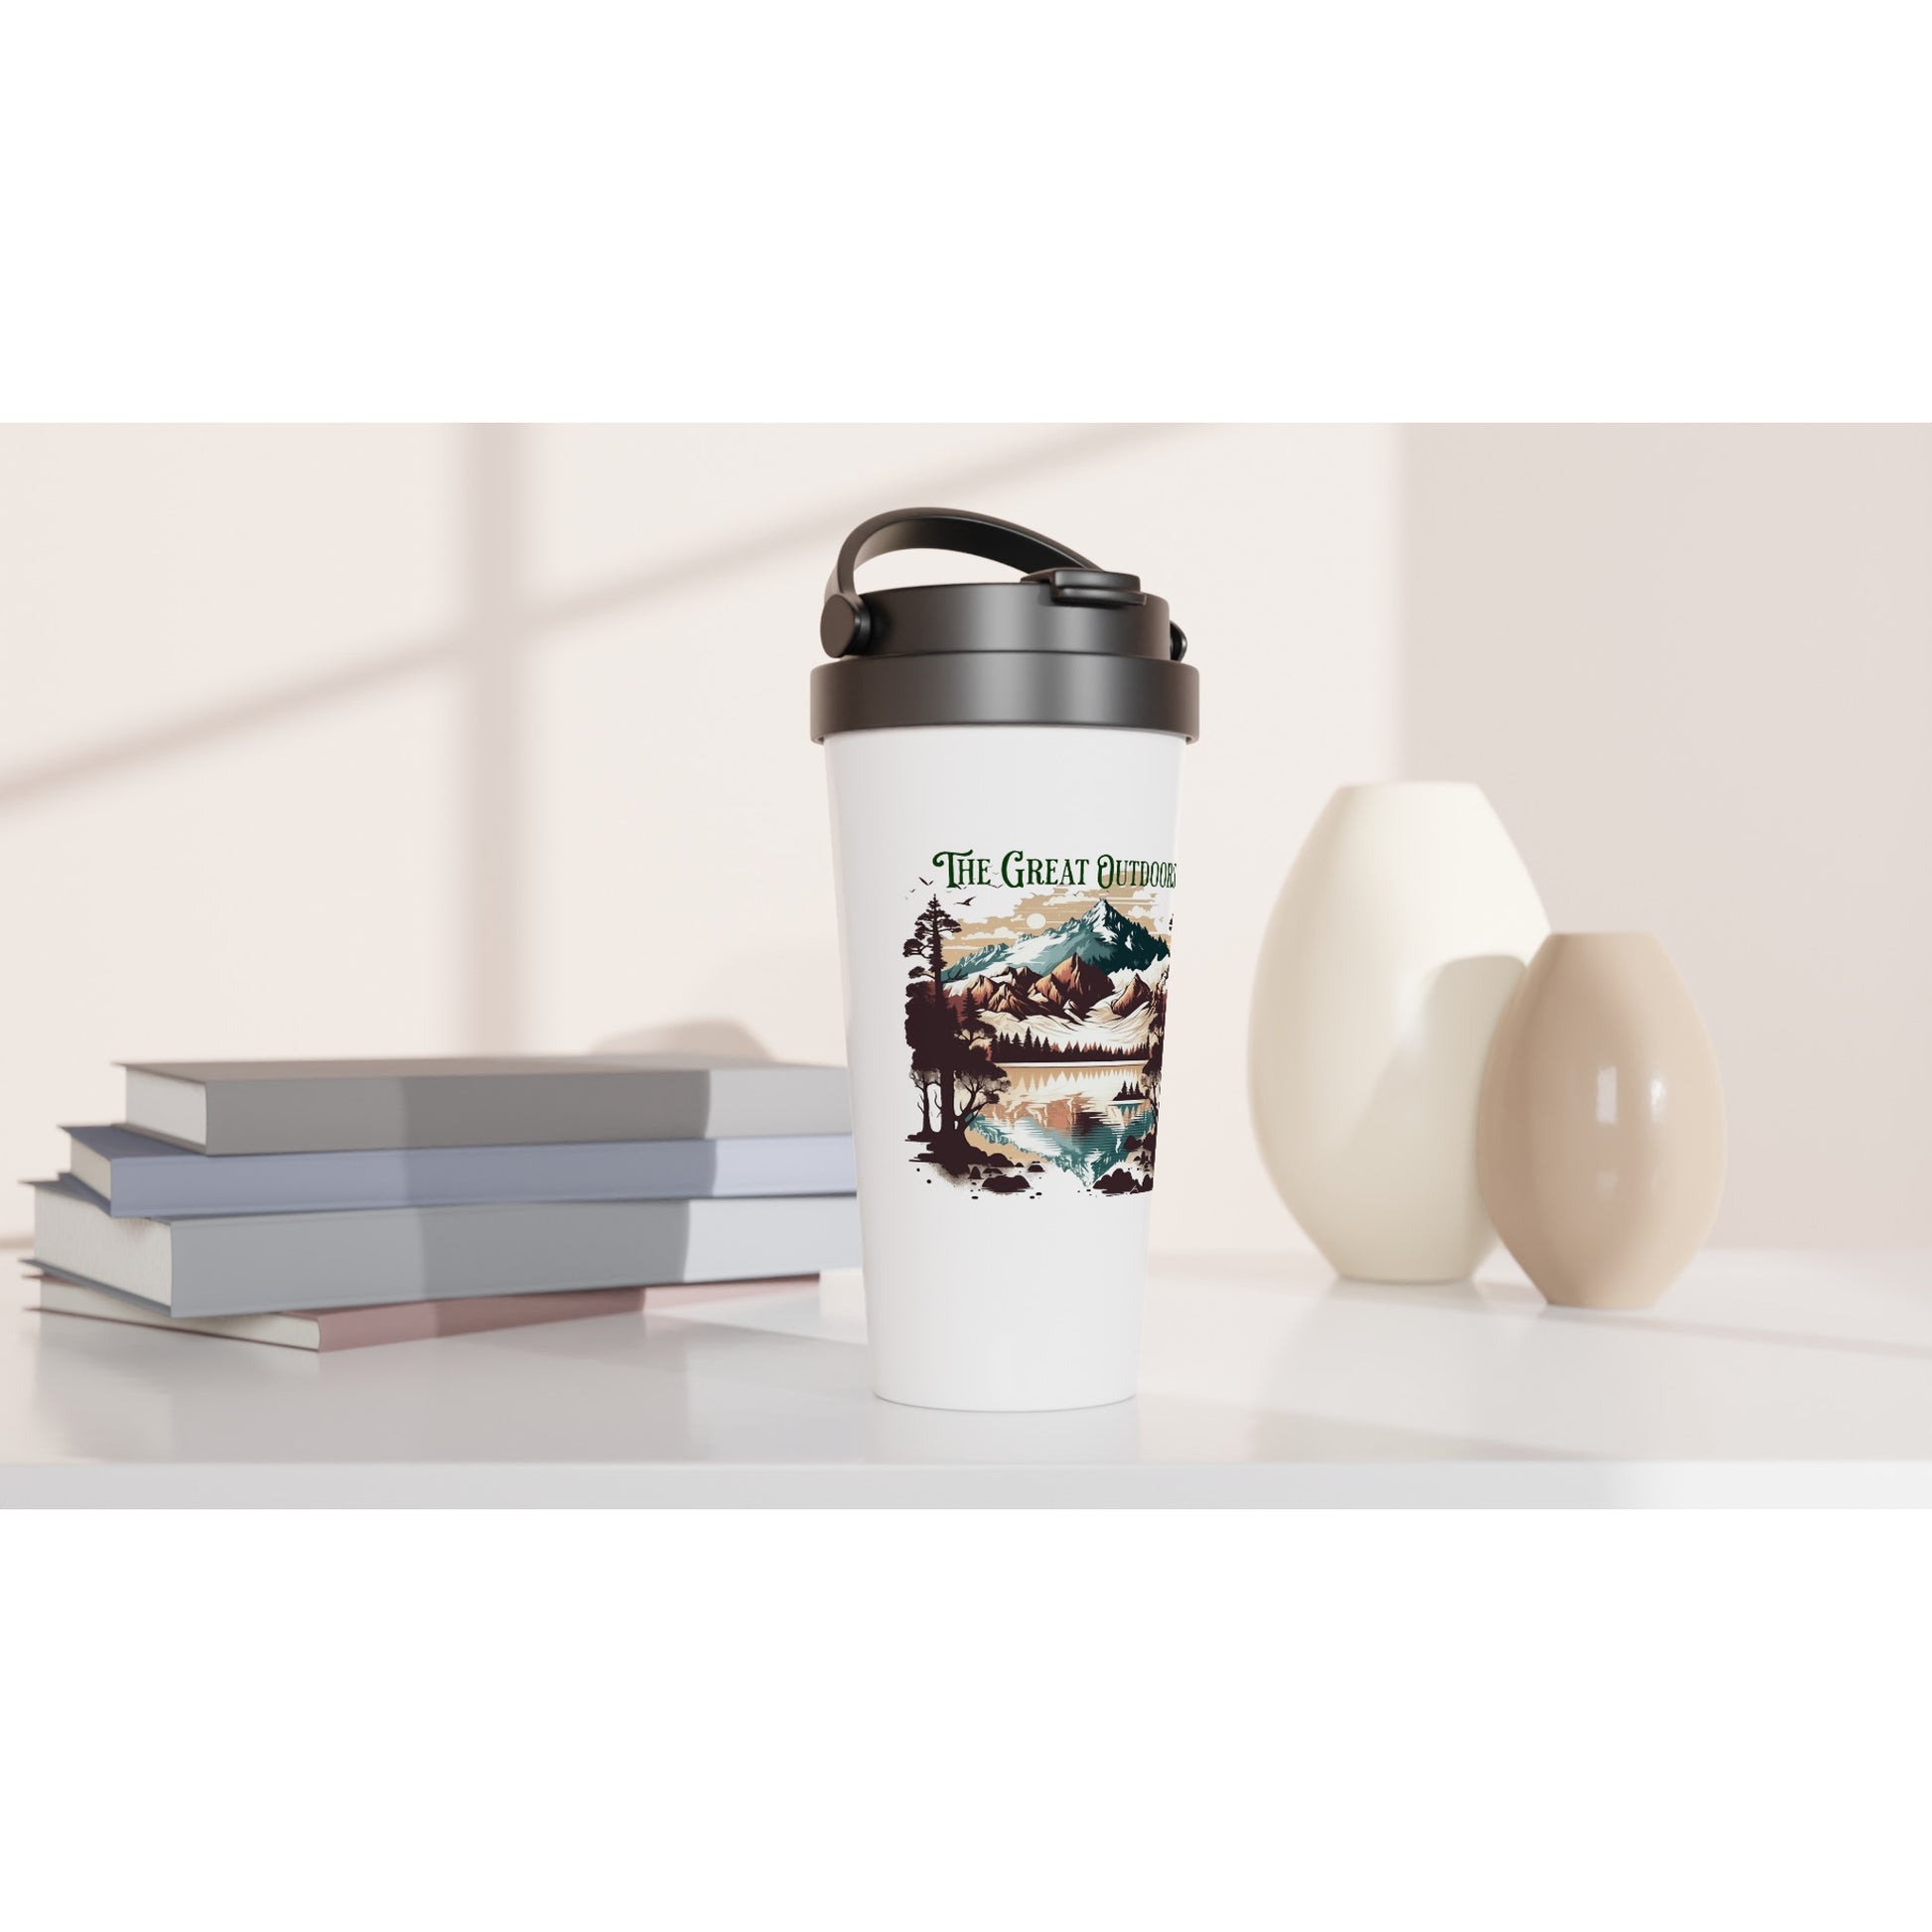 The Great Outdoors White 15oz Stainless Steel Travel Mug by Java Good Coffee